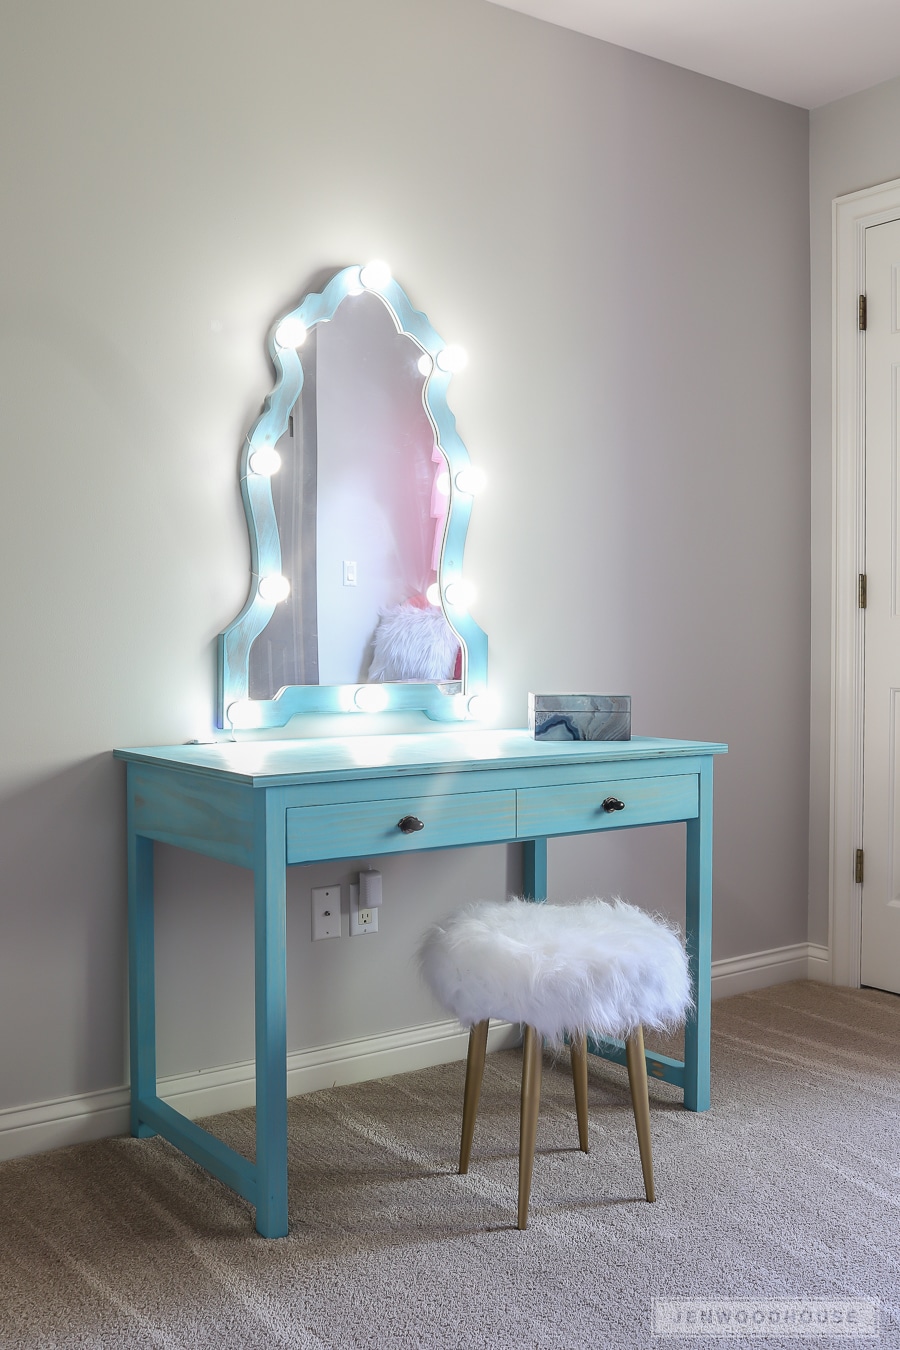 How To Make A Diy Makeup Vanity With, Vanity Mirror With Lights And Desk Diy